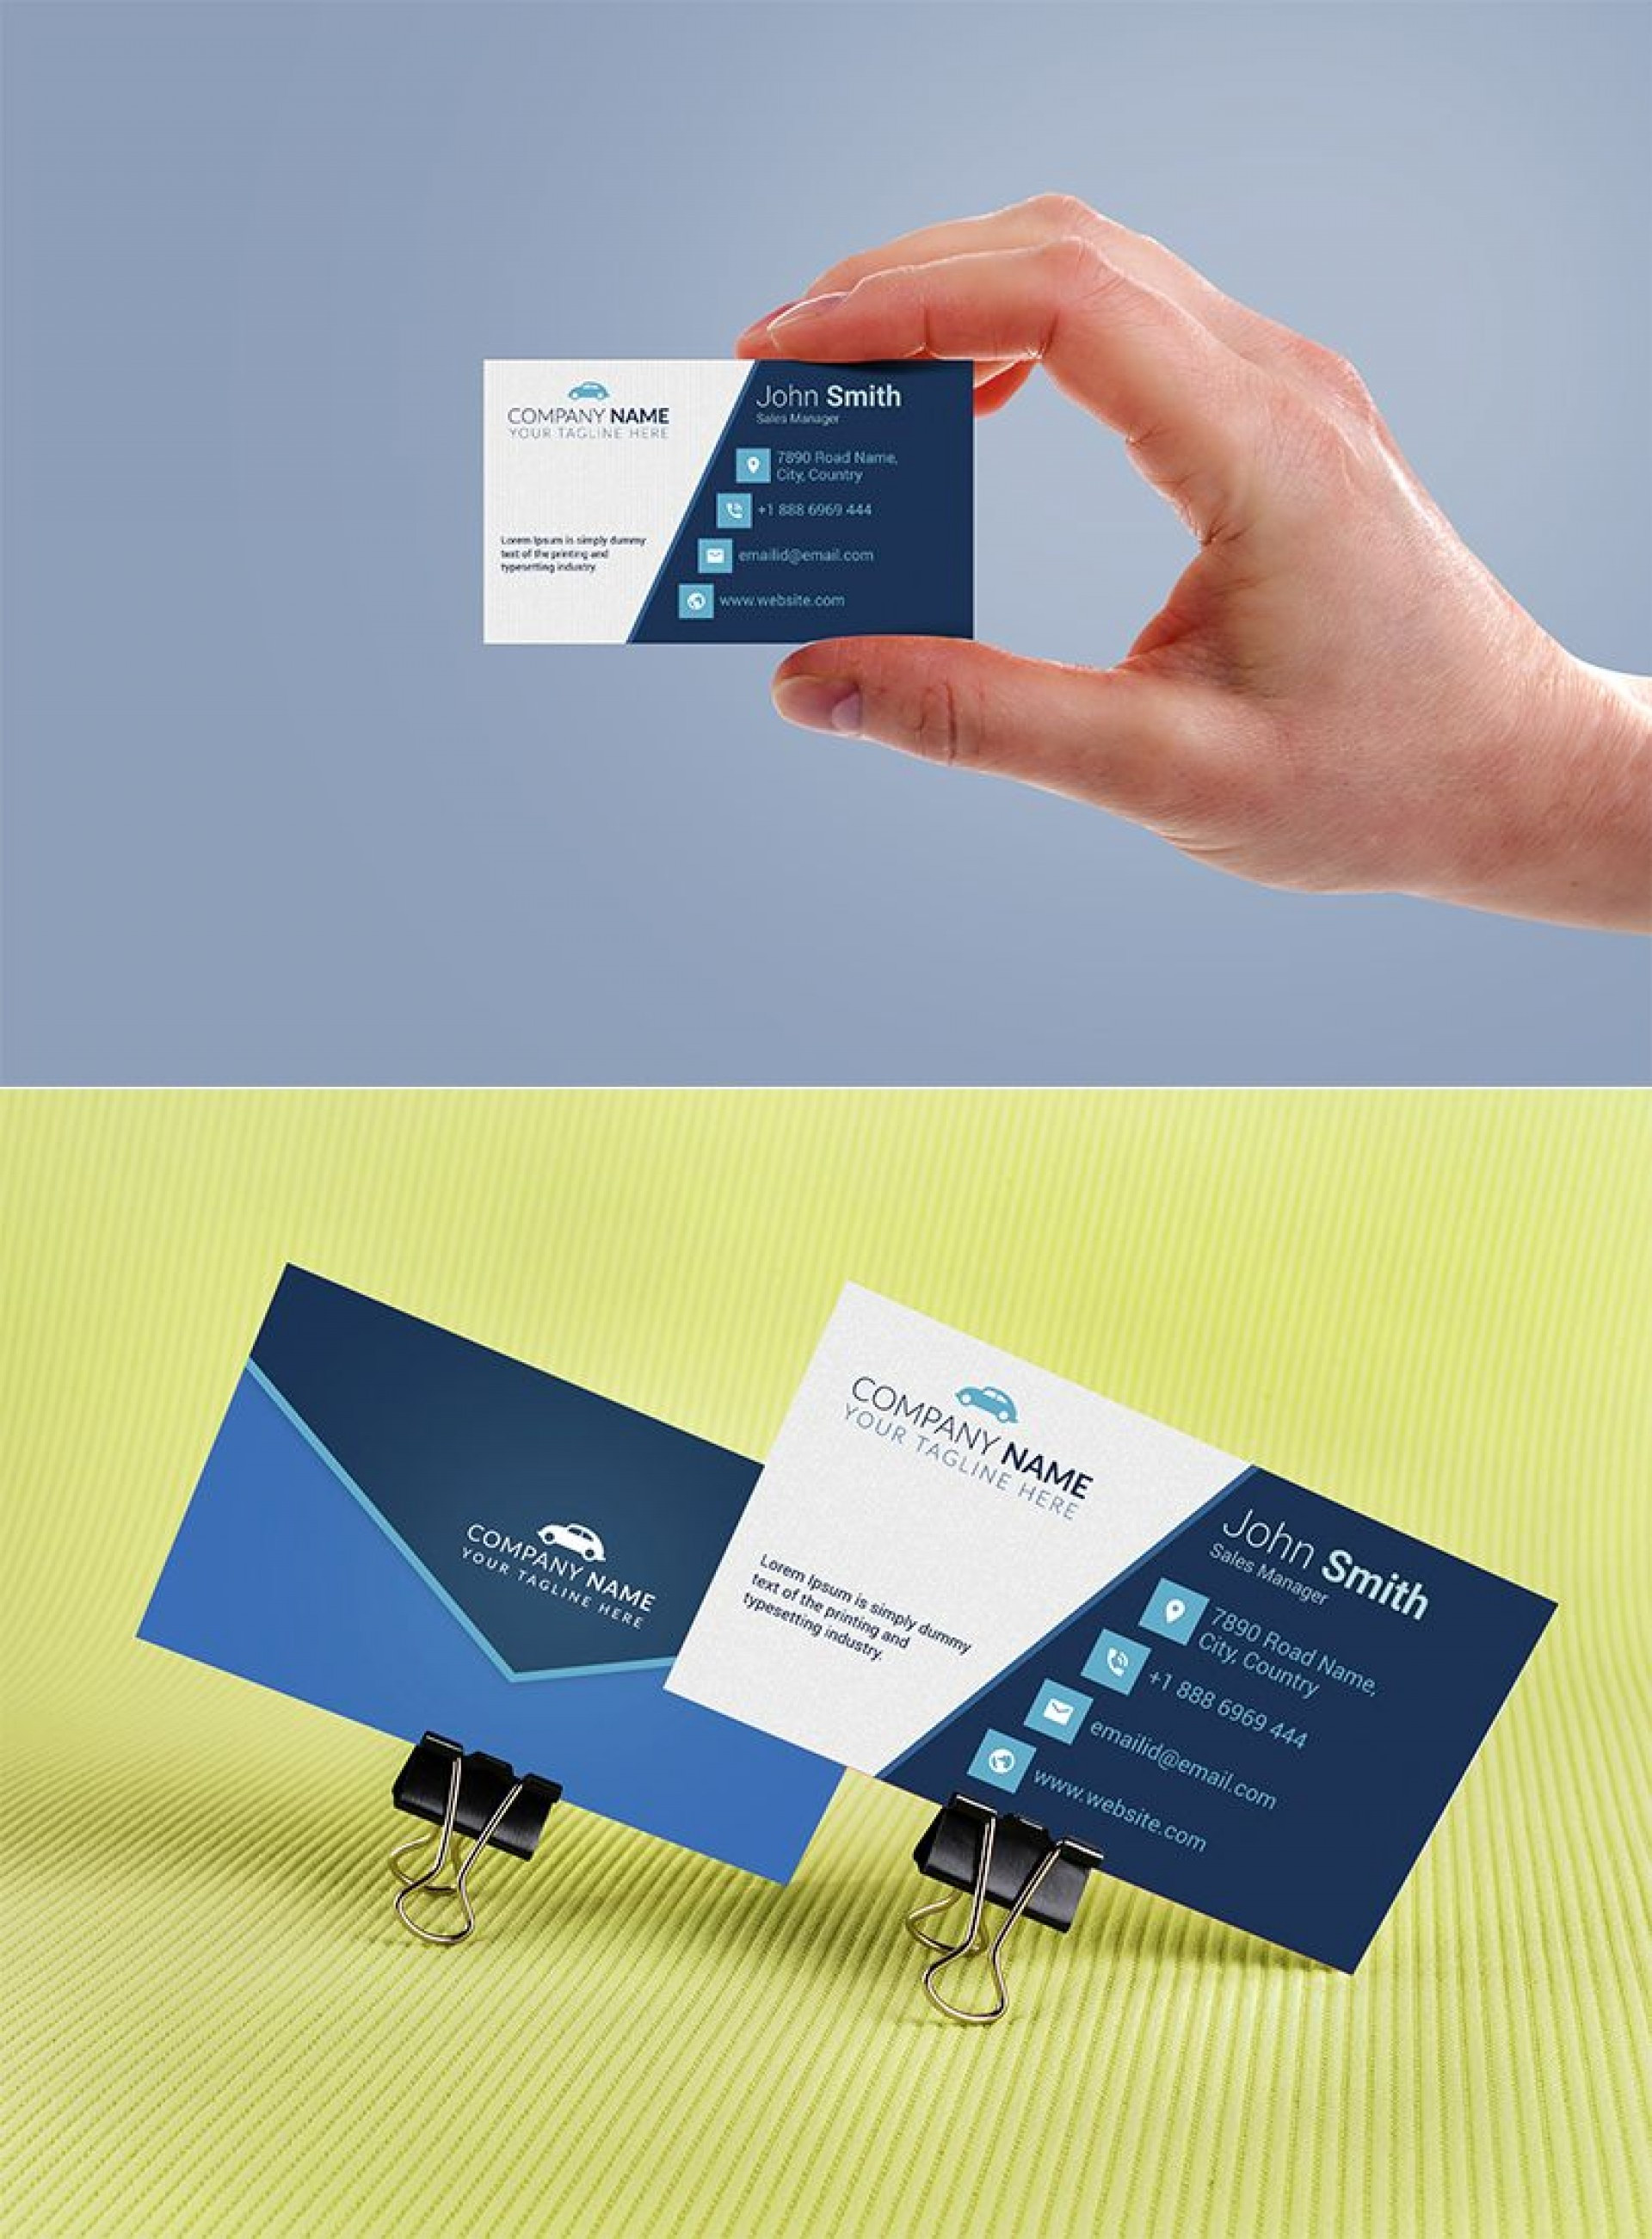 013 Business Card Template Free Download Ideas Psd Unique Of Credit Card Business Card Template